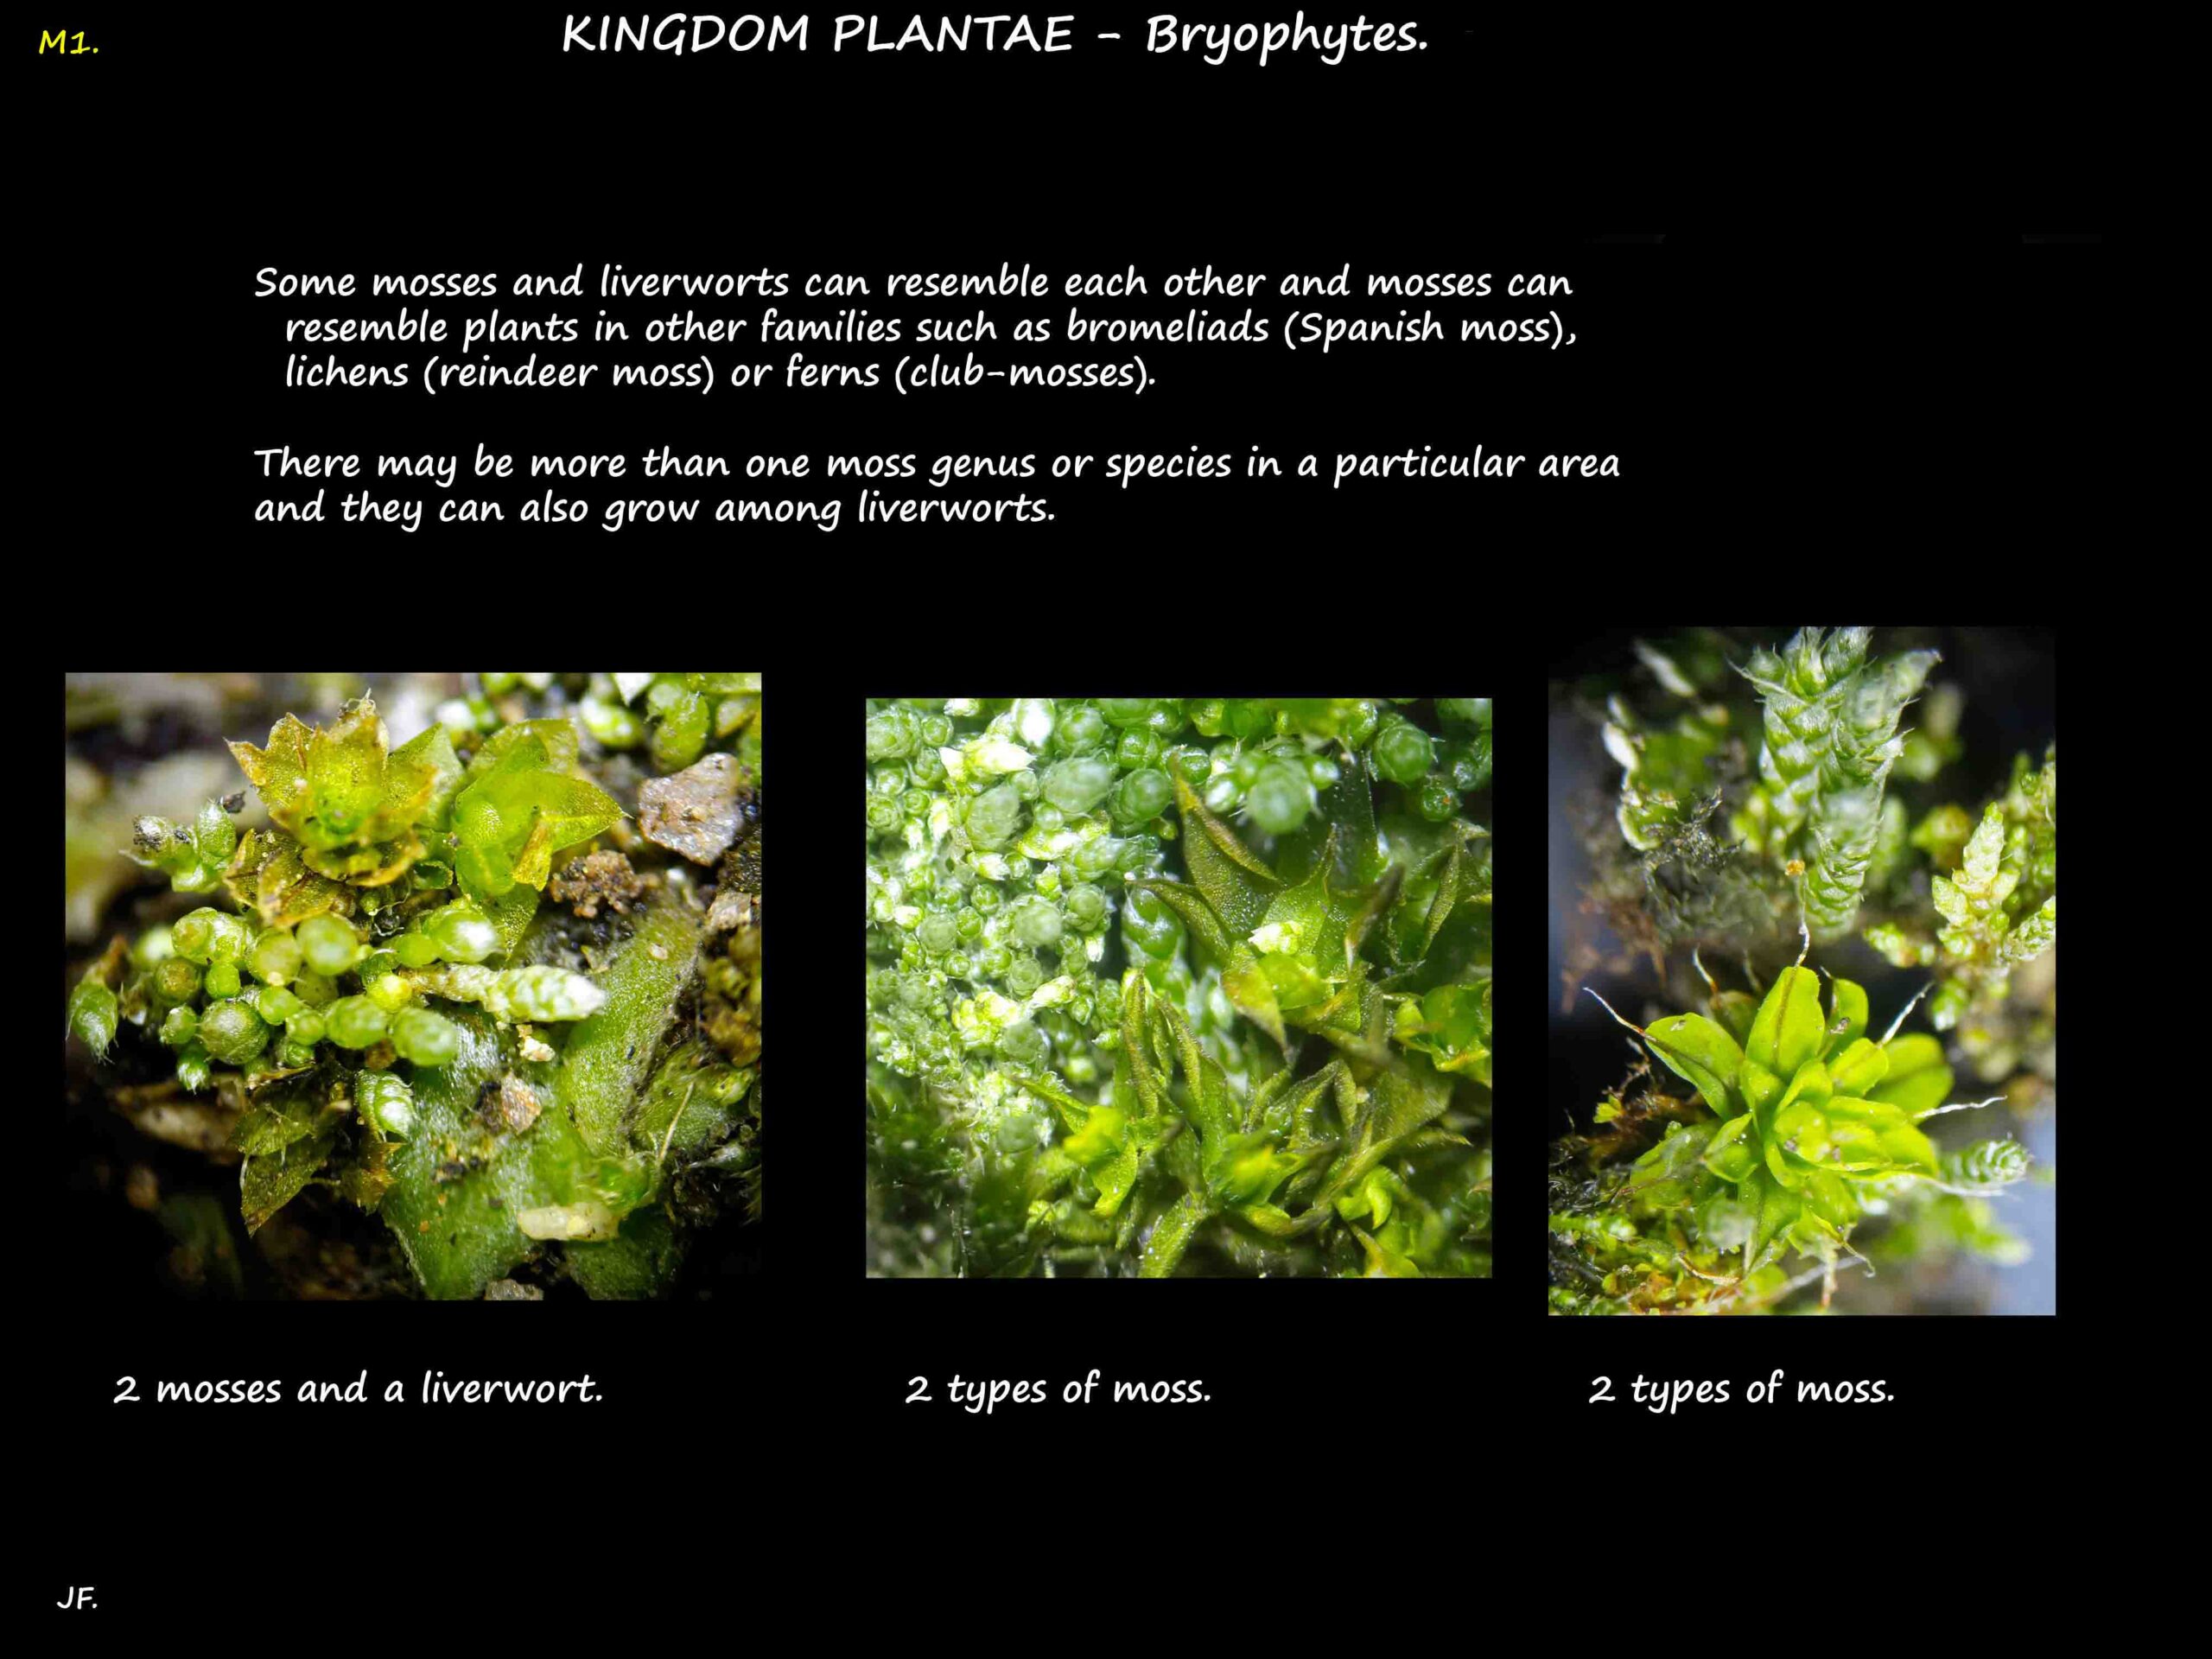 Mosses & liverworts are often found together